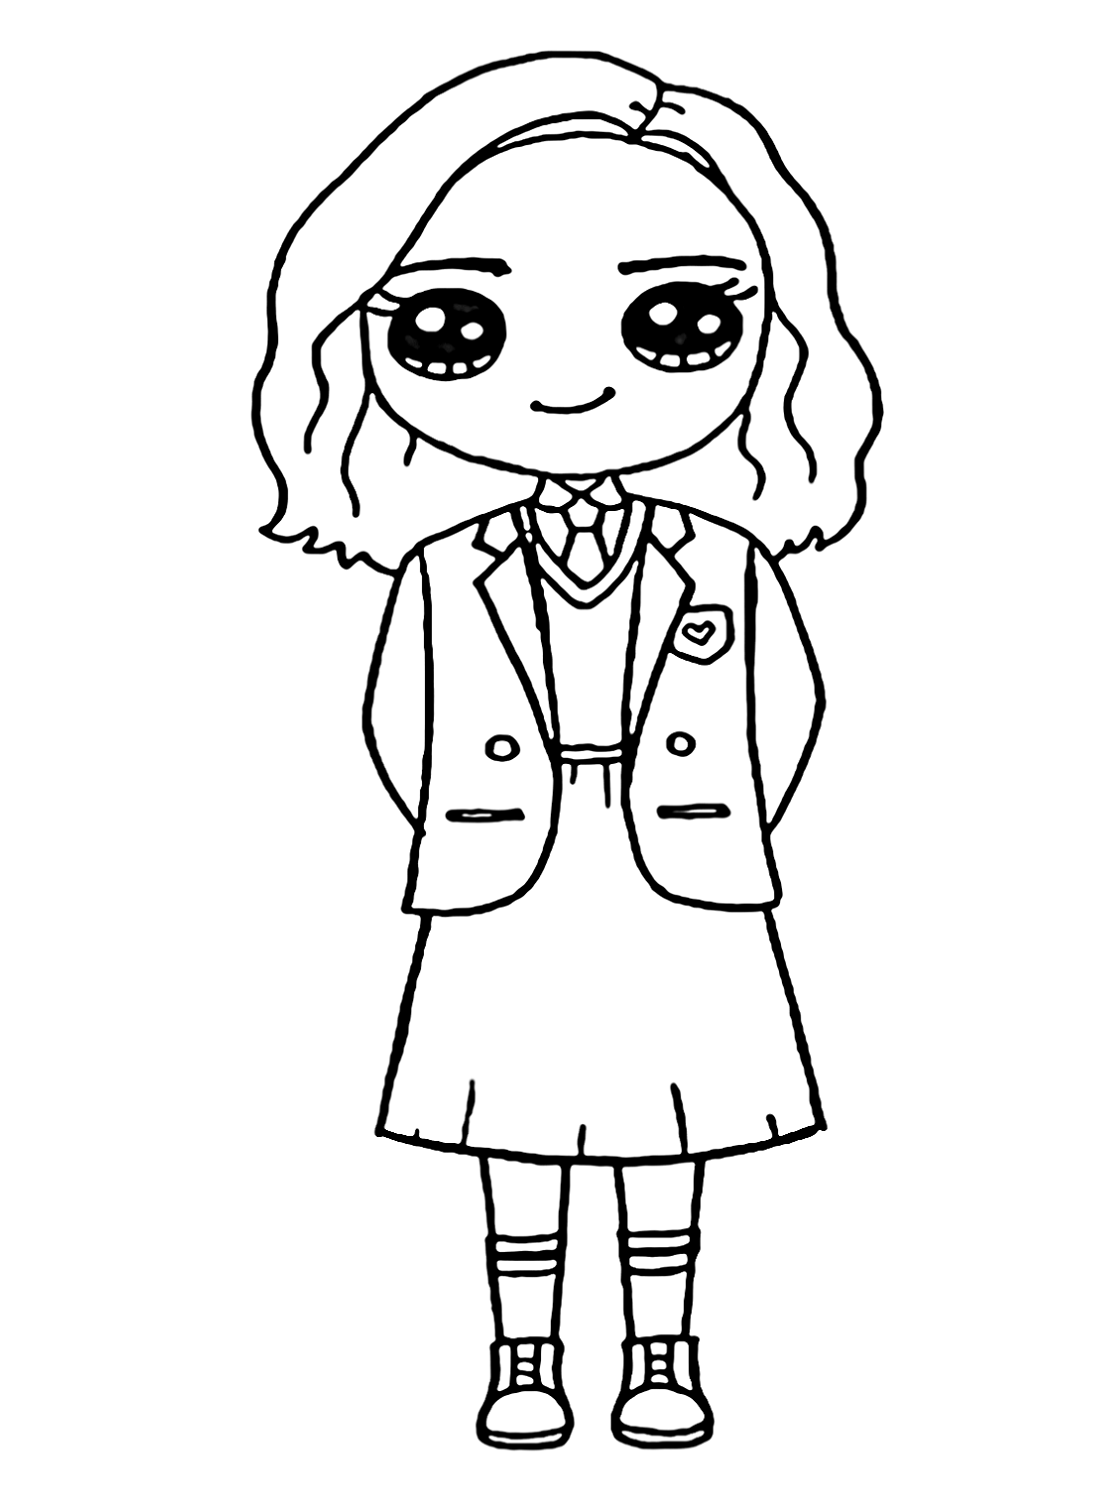 Chibi Enid Sinclair Coloring Pages - Wednesday Coloring Pages - Coloring  Pages For Kids And Adults